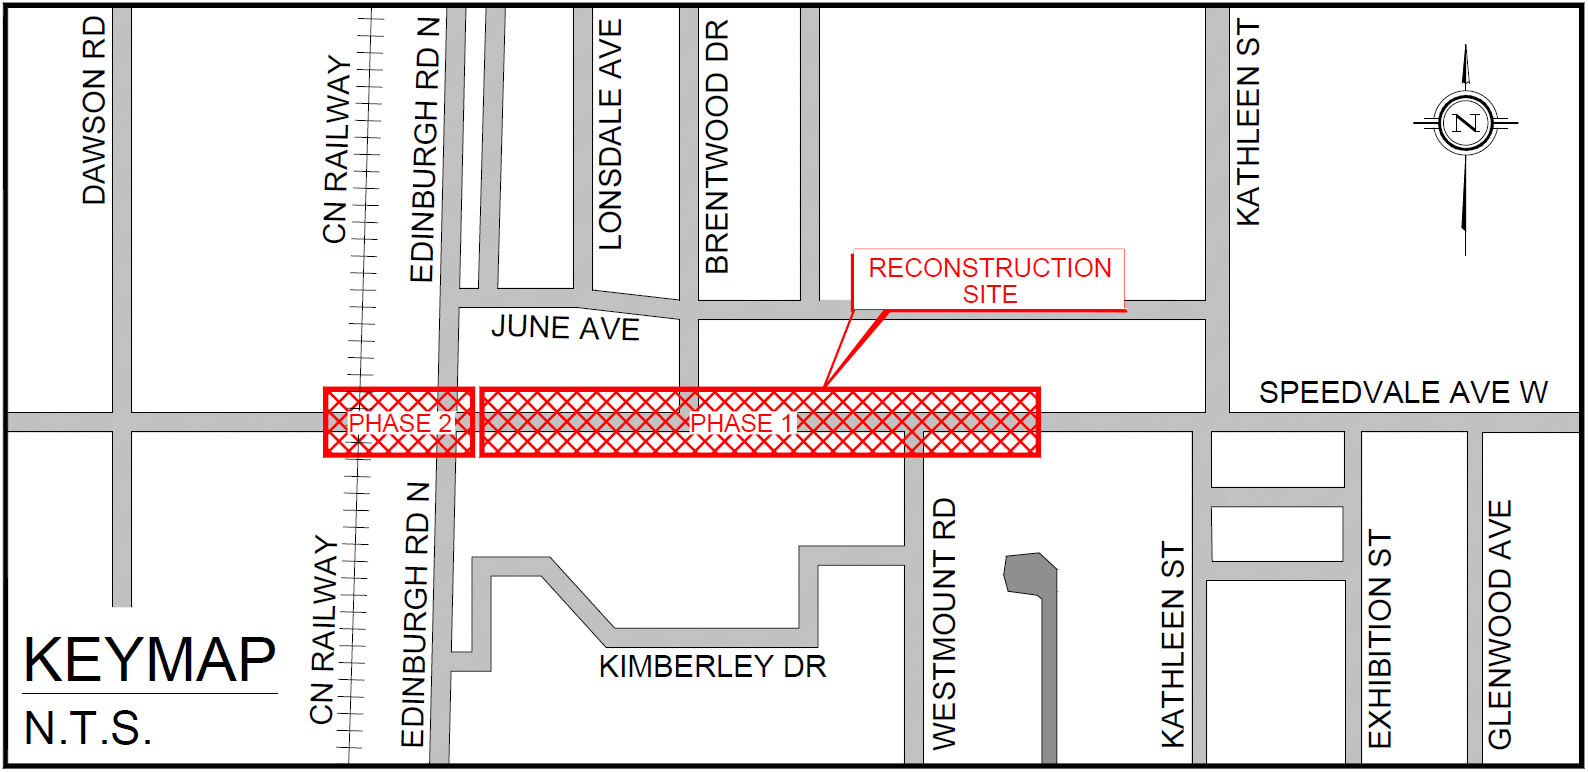 Map indicating the reconstruction site